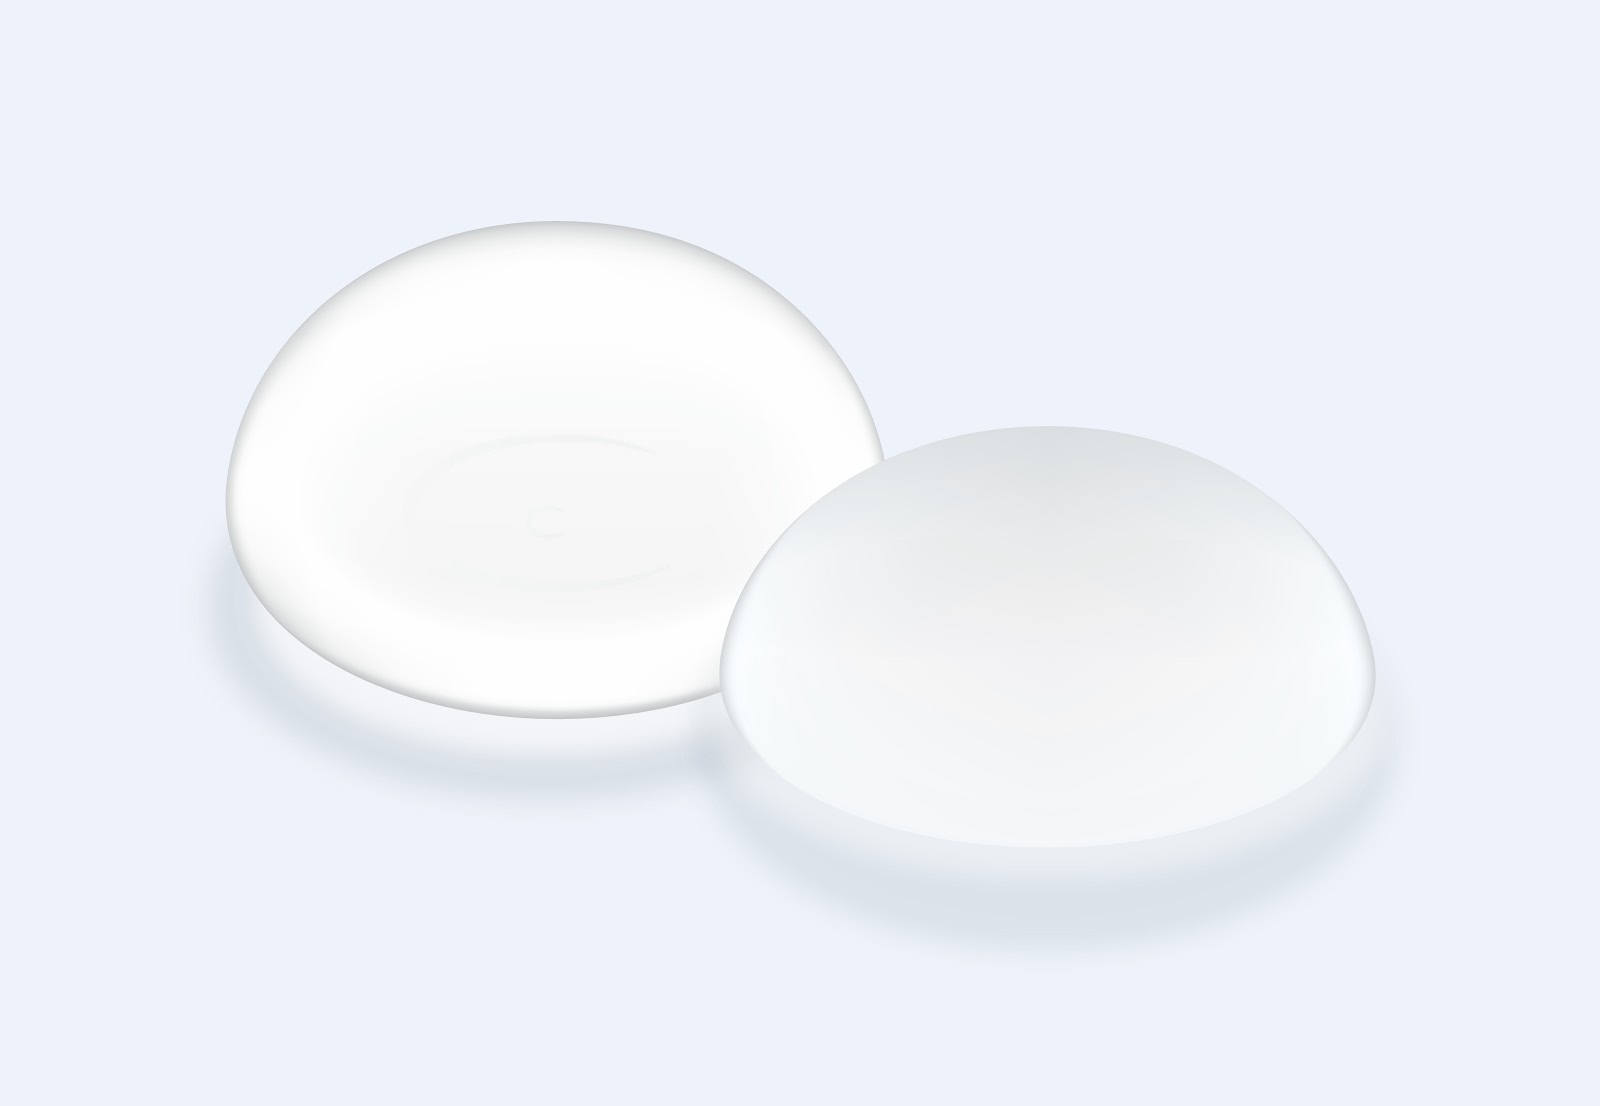 Drawing of two breast implants side by side on a blue-gray background.